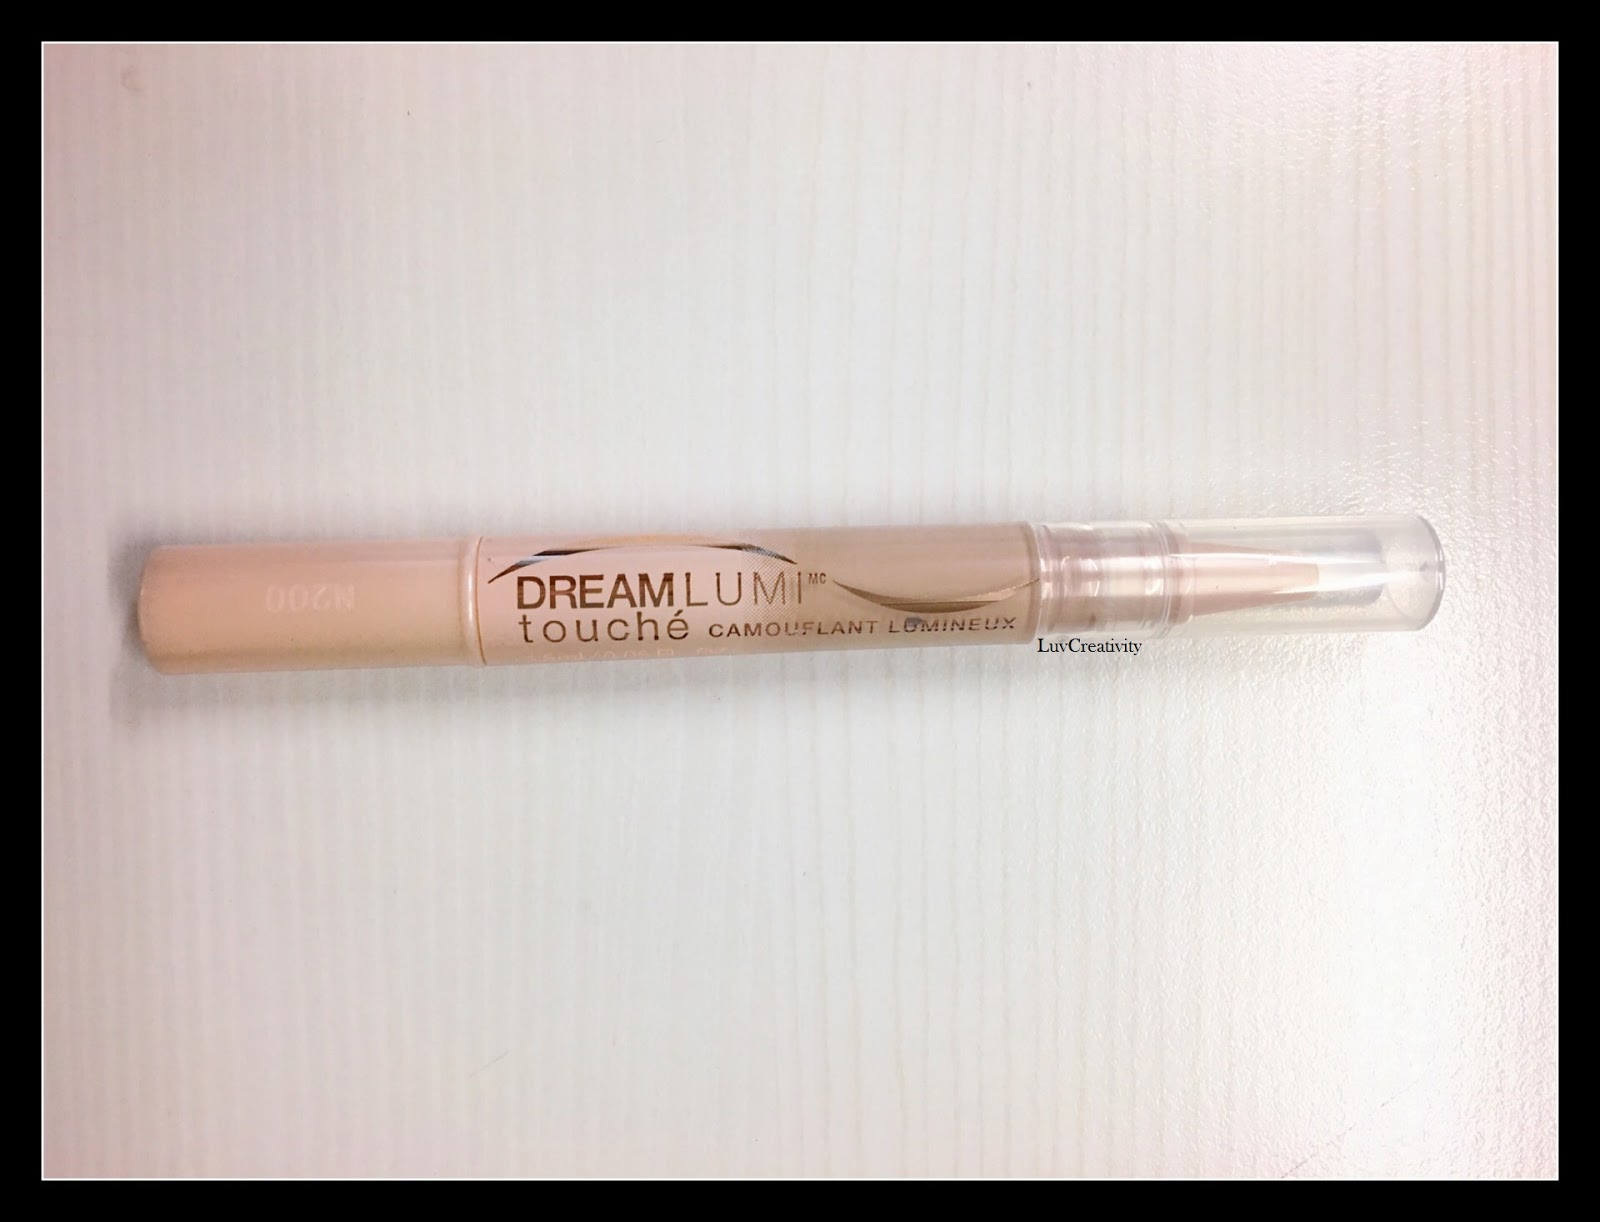 Luvcreativity Maybelline Dream Lumi Touch Concealer